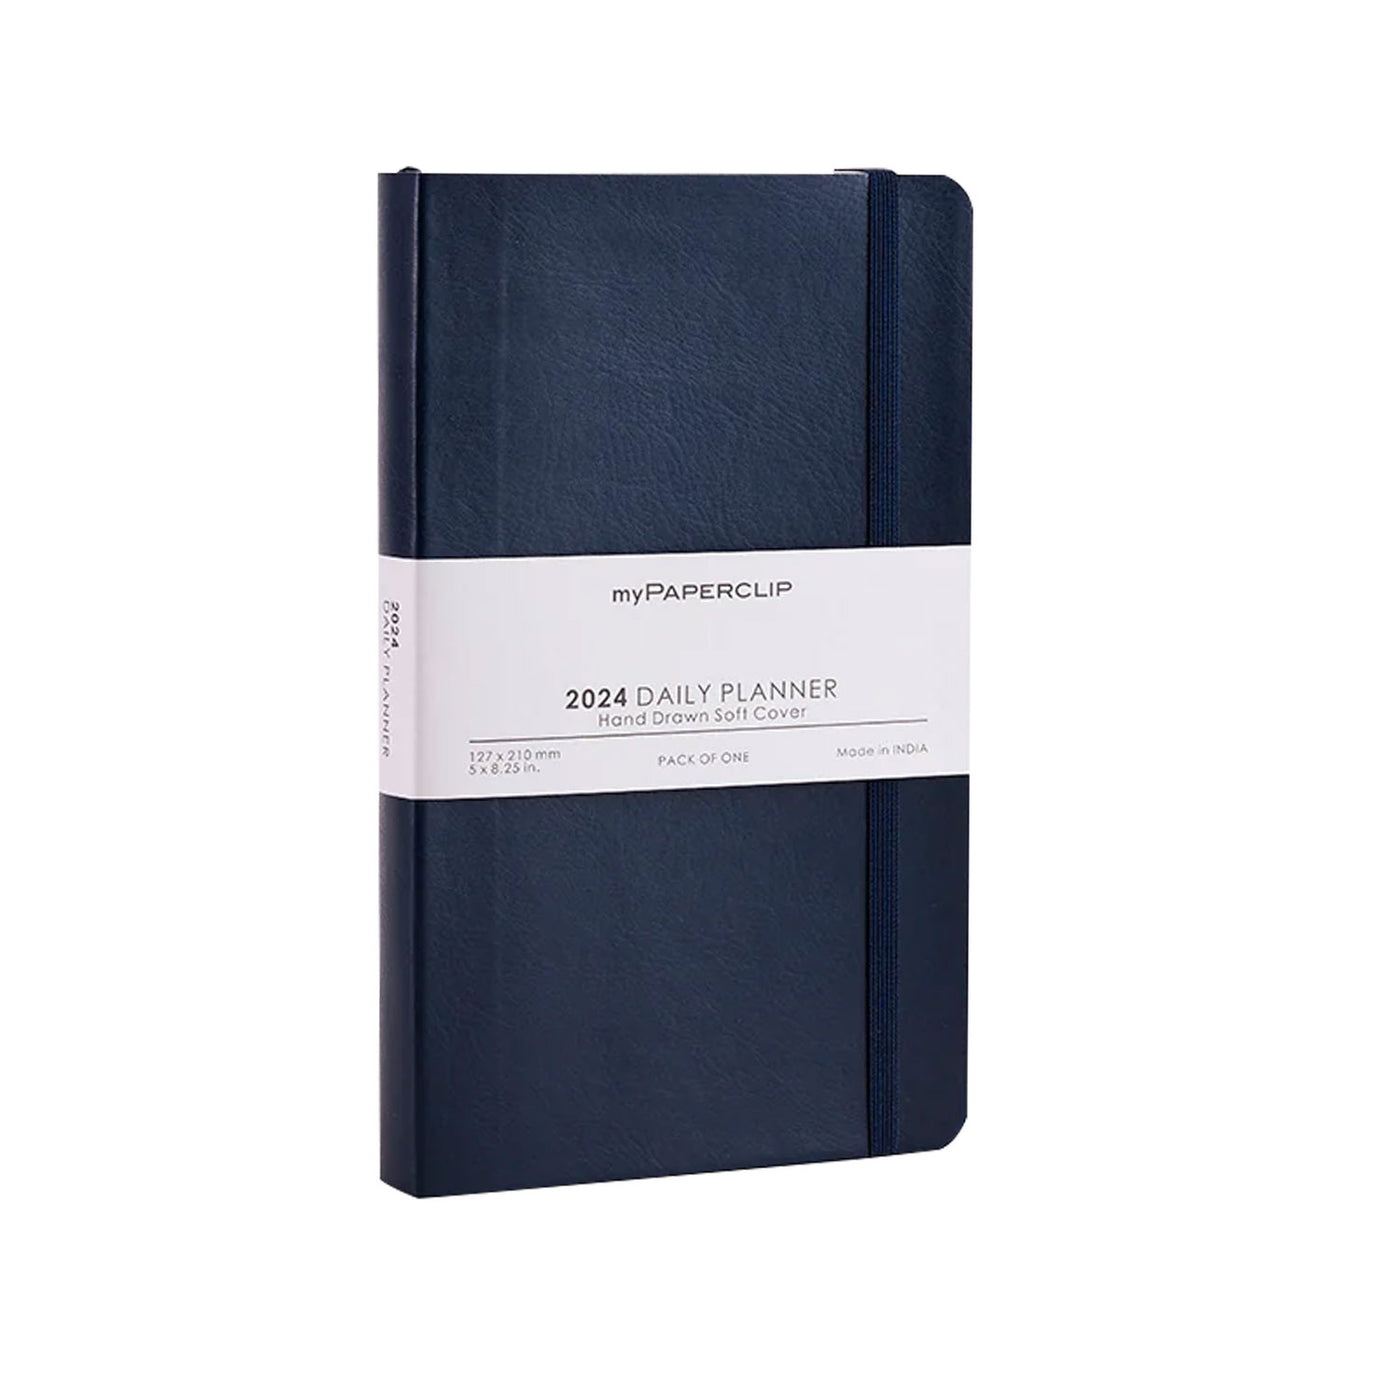 myPAPERCLIP M2 2024 Daily Planner - Blue 1